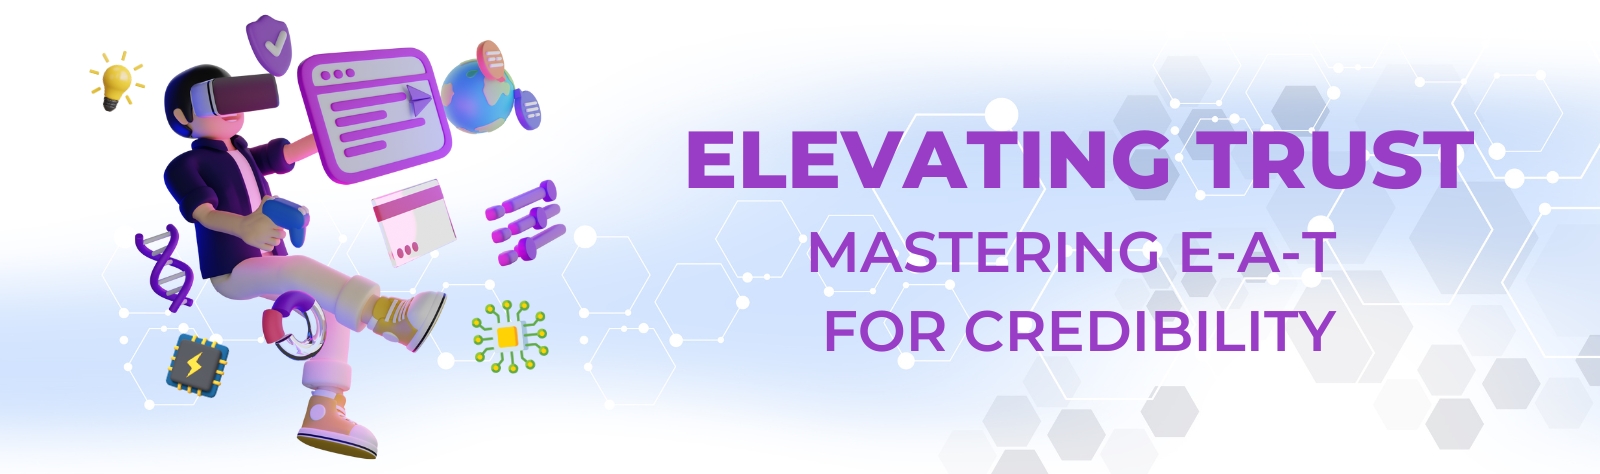 elevating-trust-mastering-e-a-t